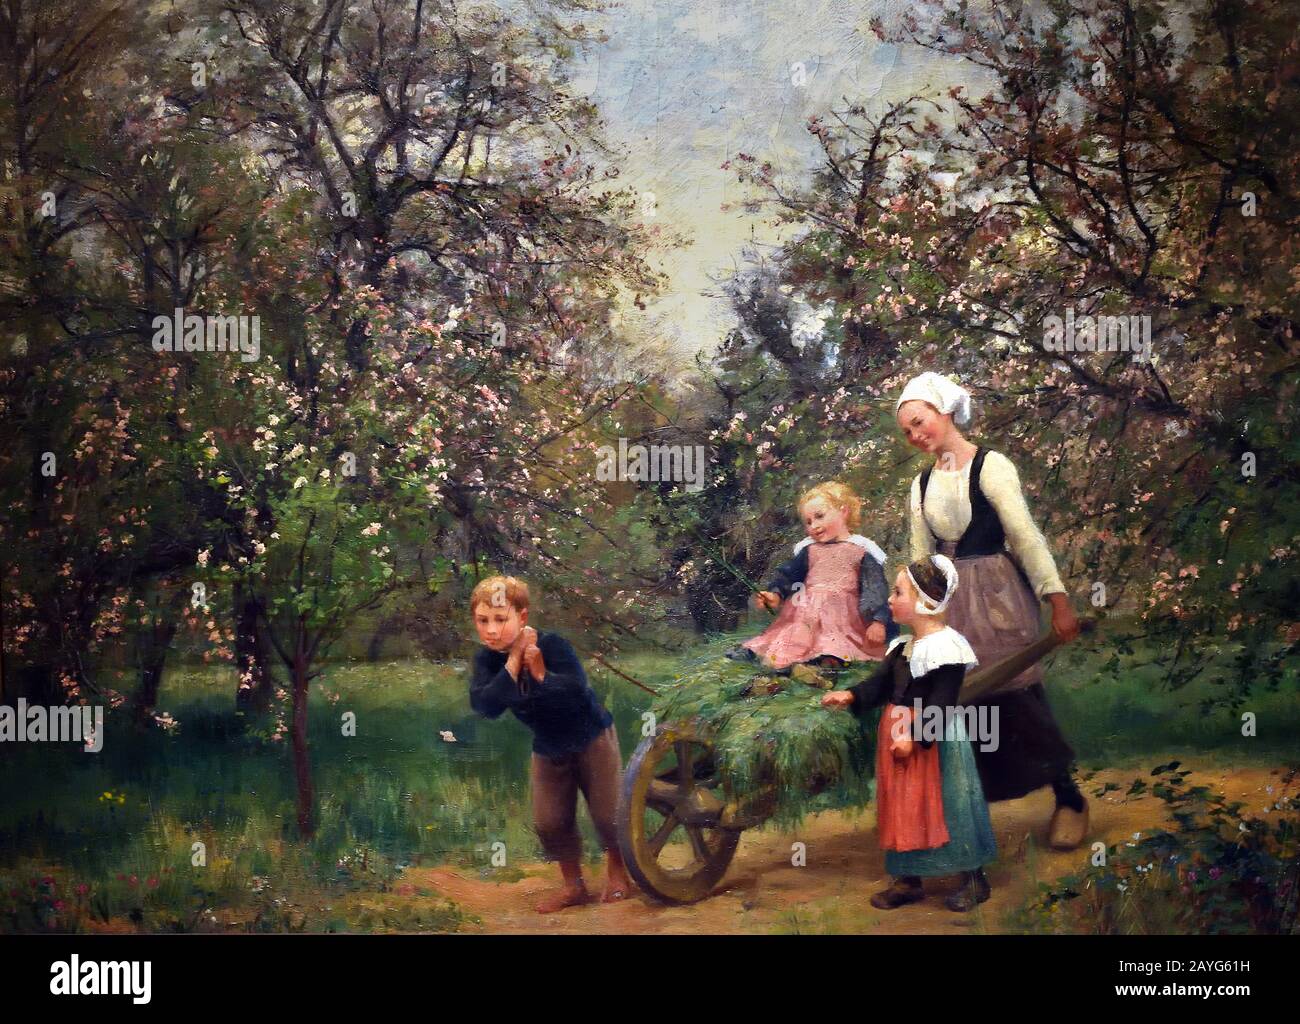 Apple blossoms 1885 Théophile Deyrolle 1844 - 1923. Orchard with a young mother and three children join forces to transport mown grass with a wheelbarrow. France, French, Stock Photo